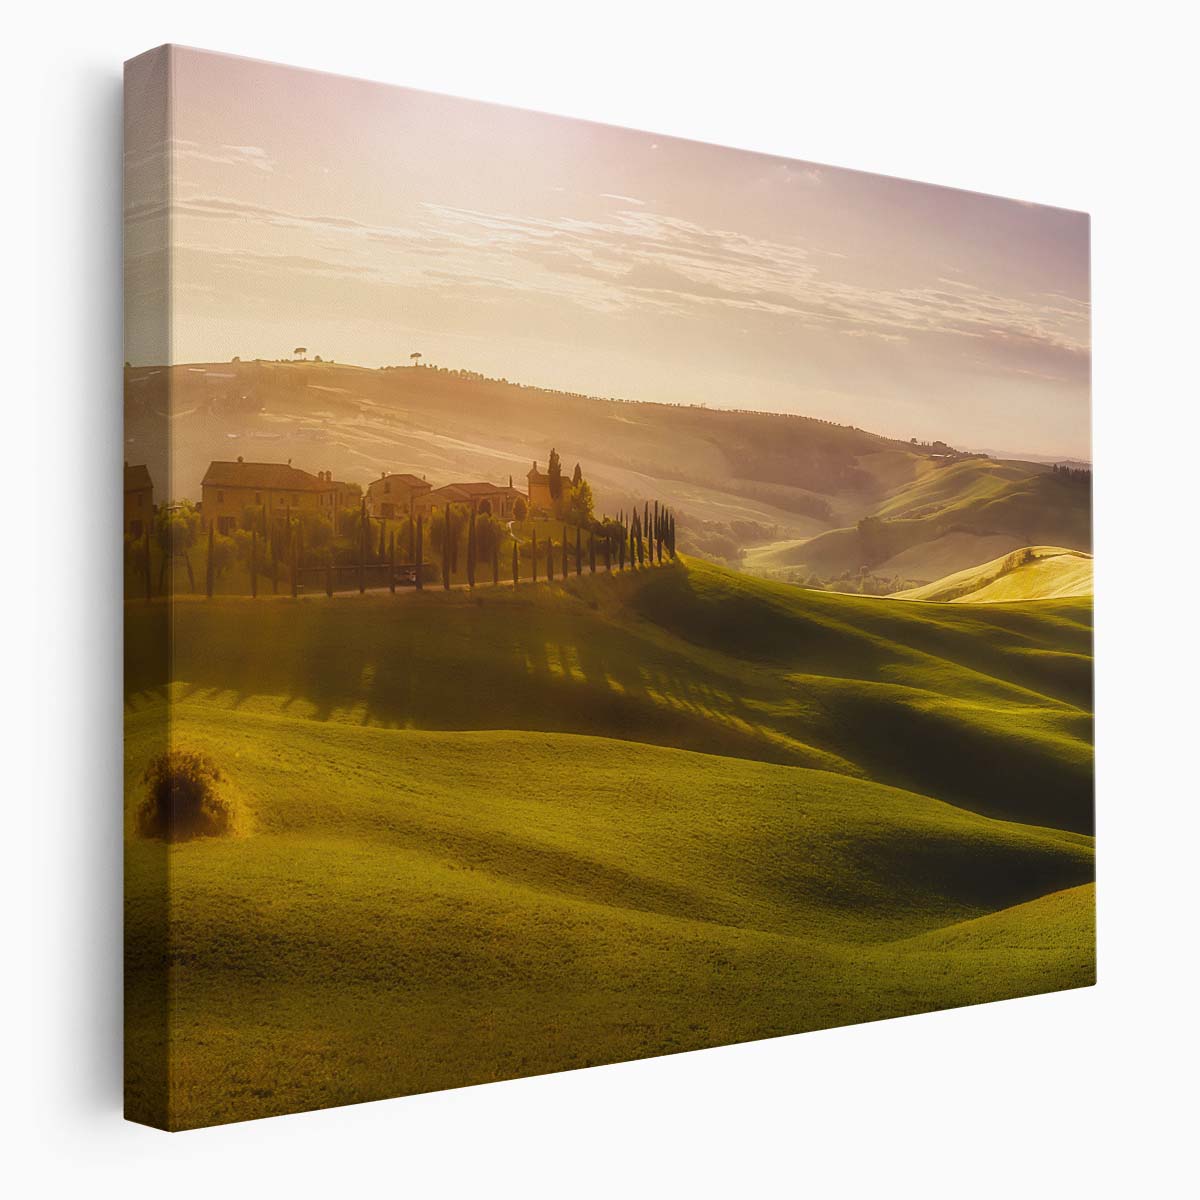 Iconic Tuscany Sunrise Landscape Panorama Wall Art by Luxuriance Designs. Made in USA.